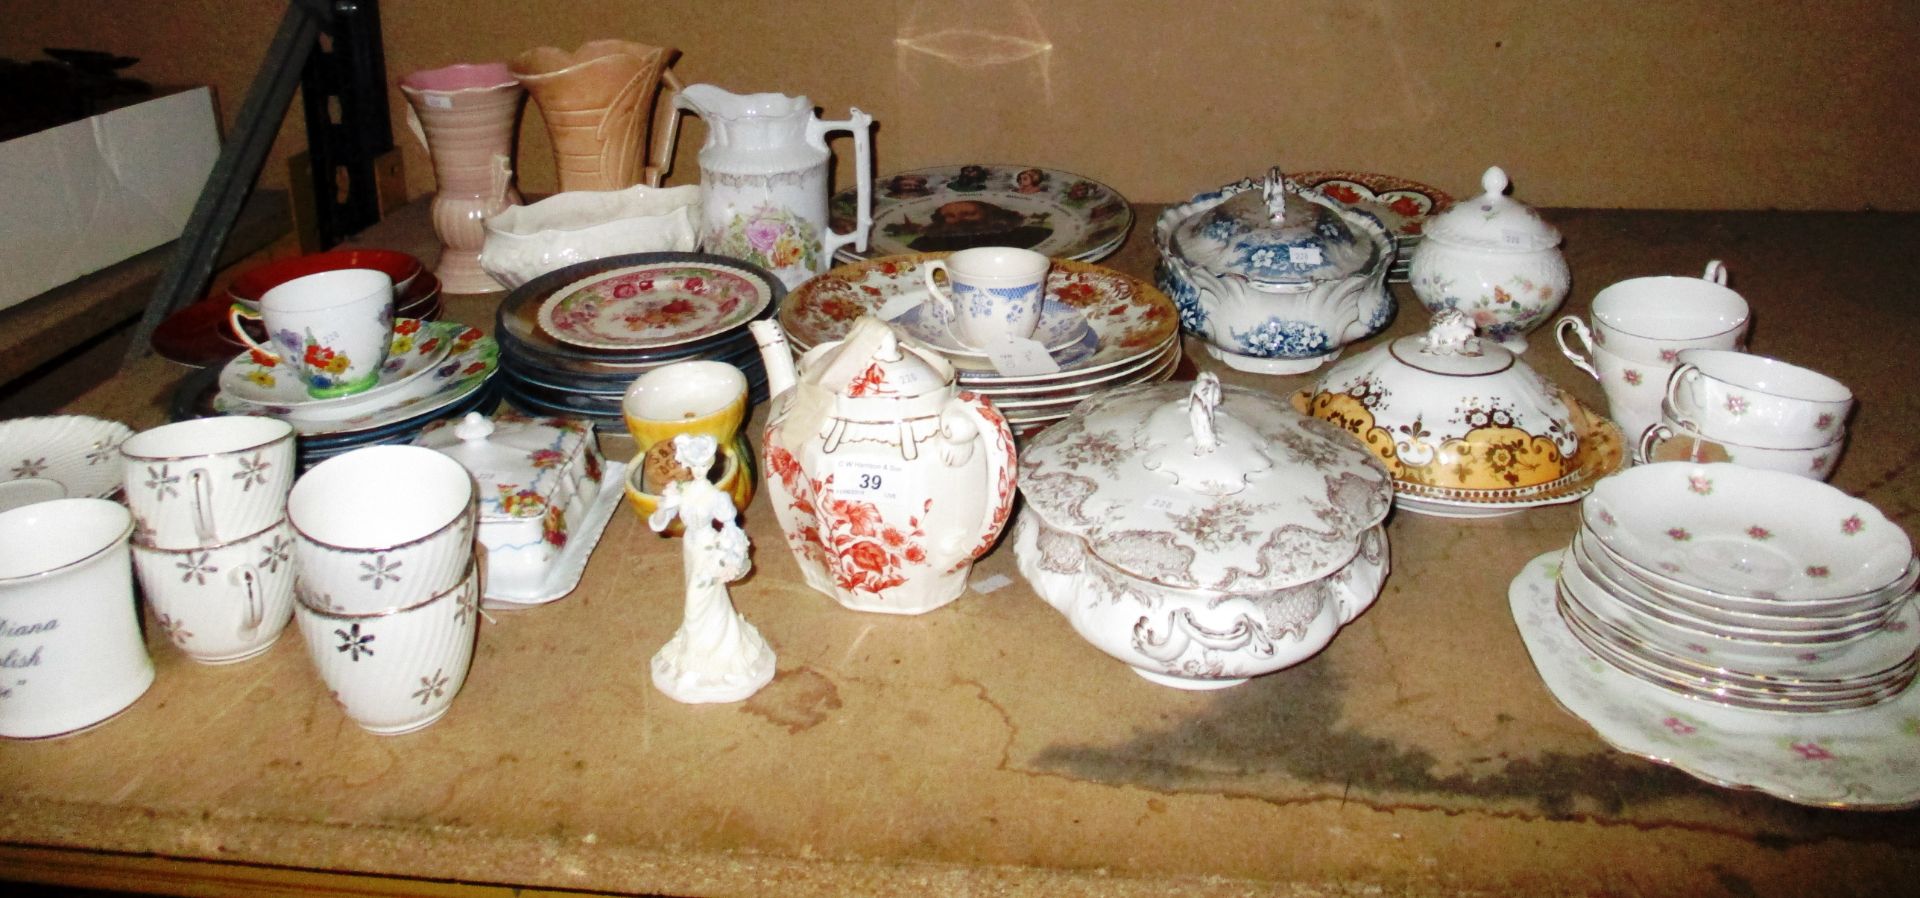 A quantity of pottery and porcelain - vases, trio set, cups, saucers,